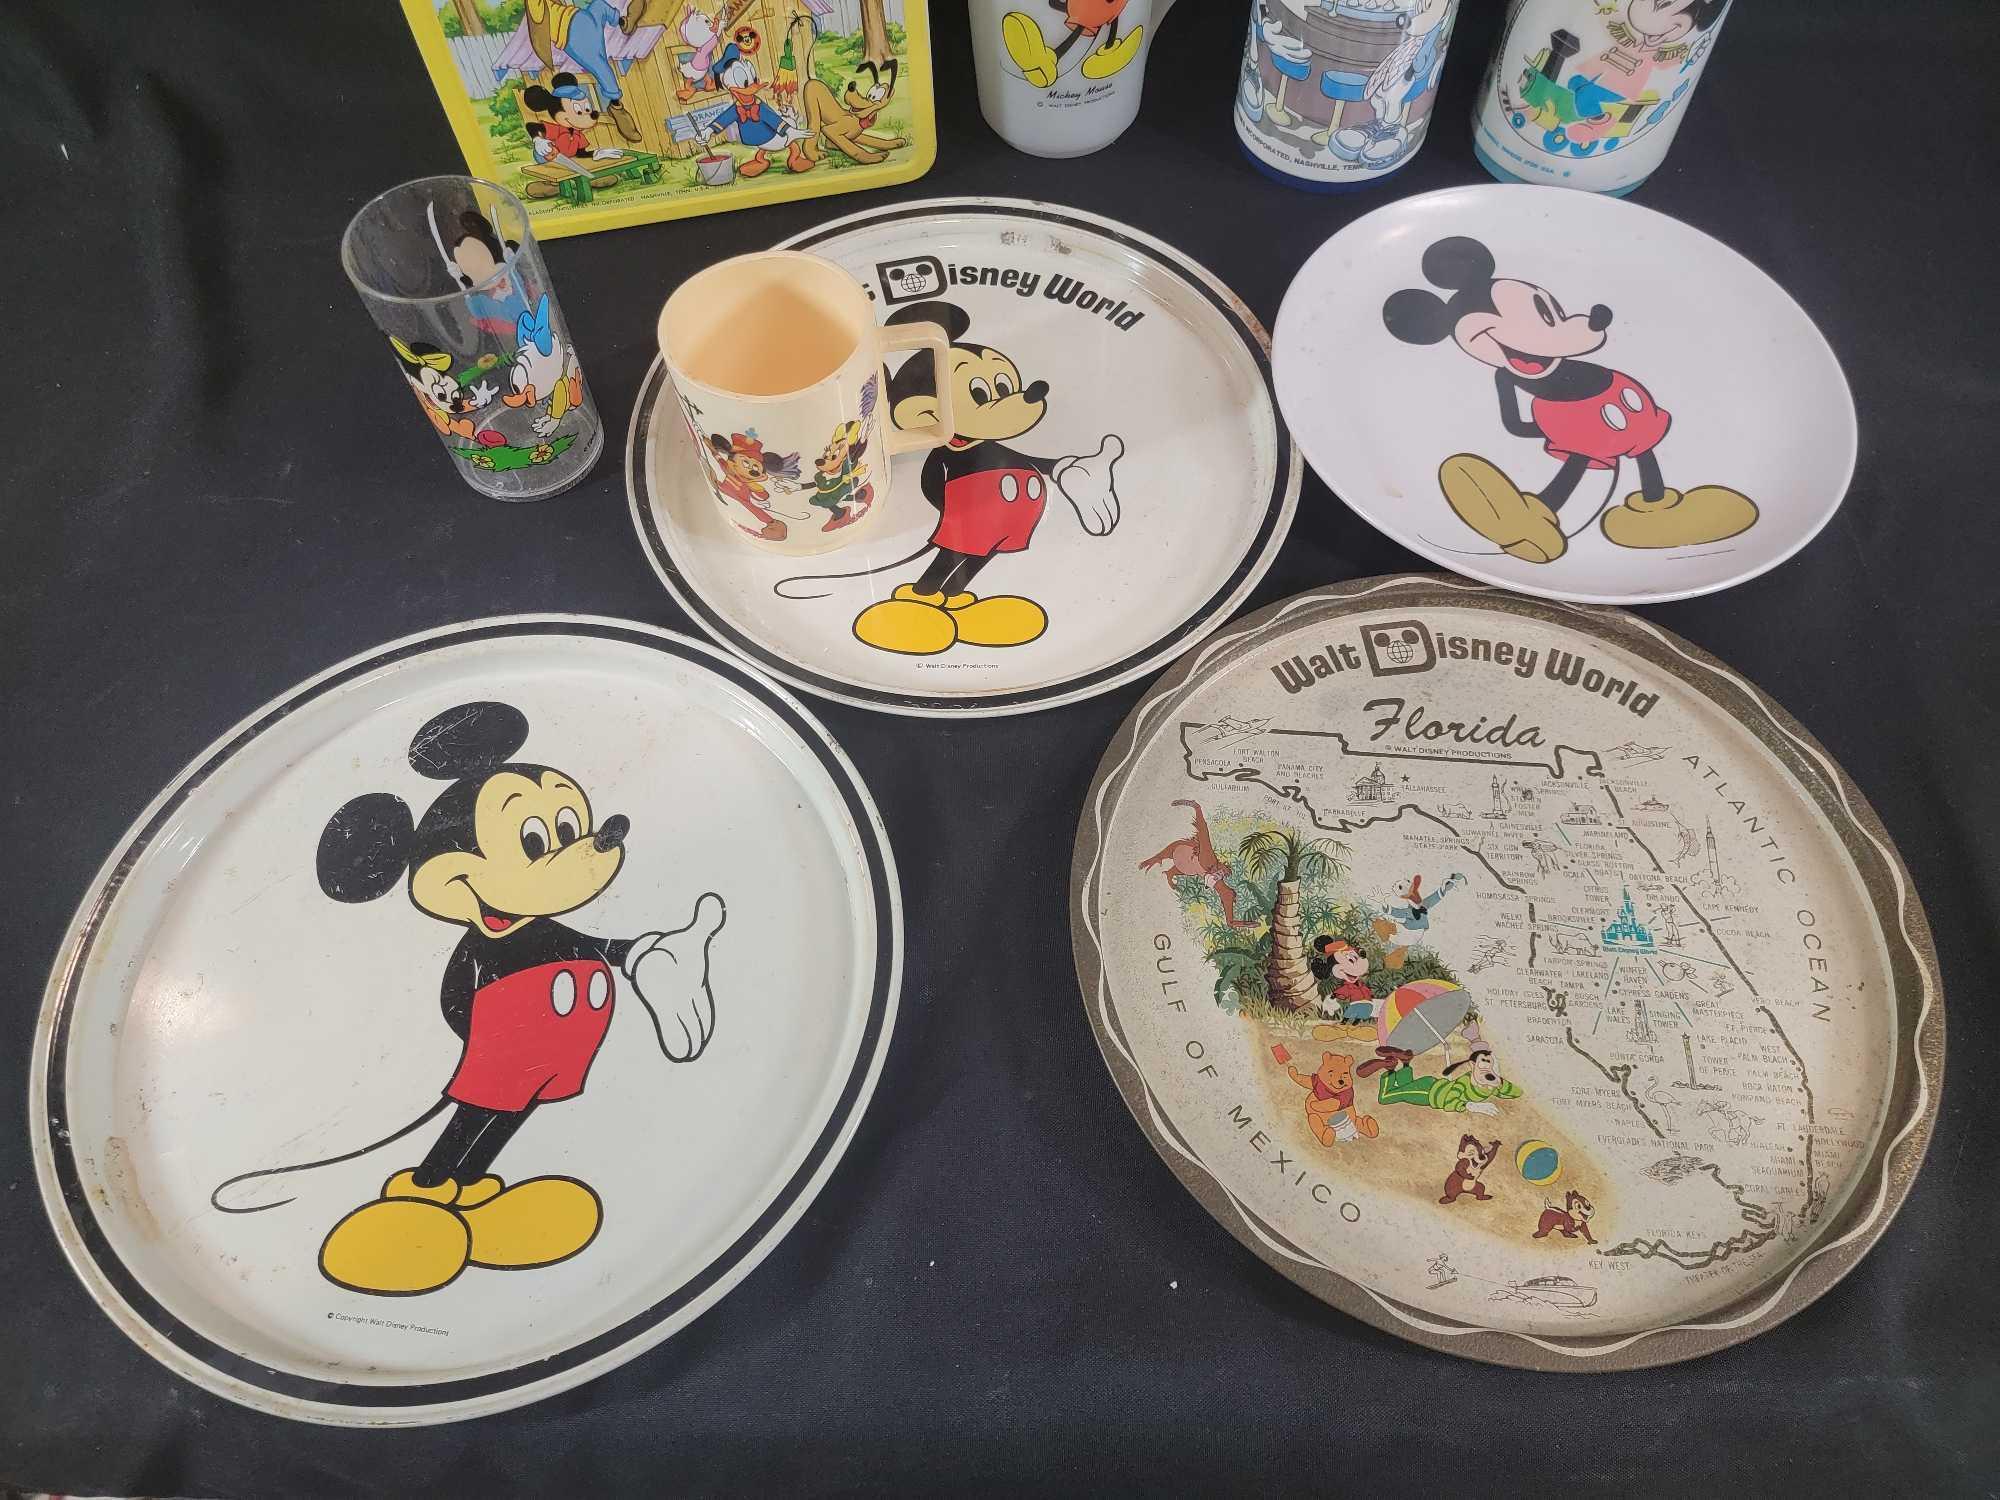 Sold at Auction: Vintage Walt Disney World Metal Lunchbox and Thermos